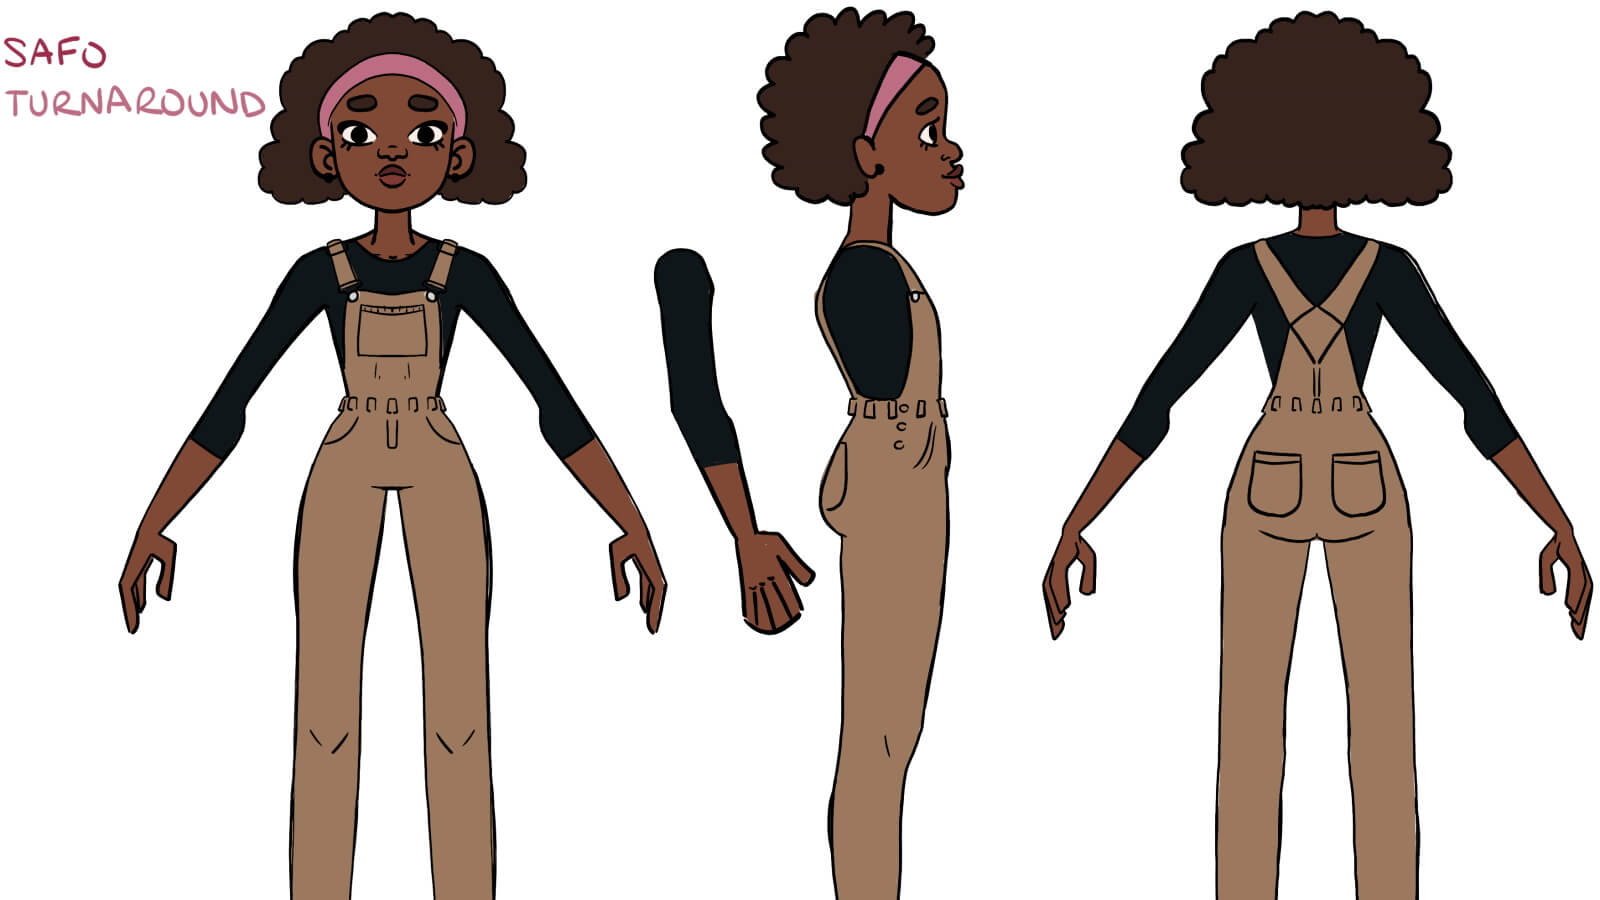 Turnaround of the SAFO main character, the sculptress, from multiple angles.